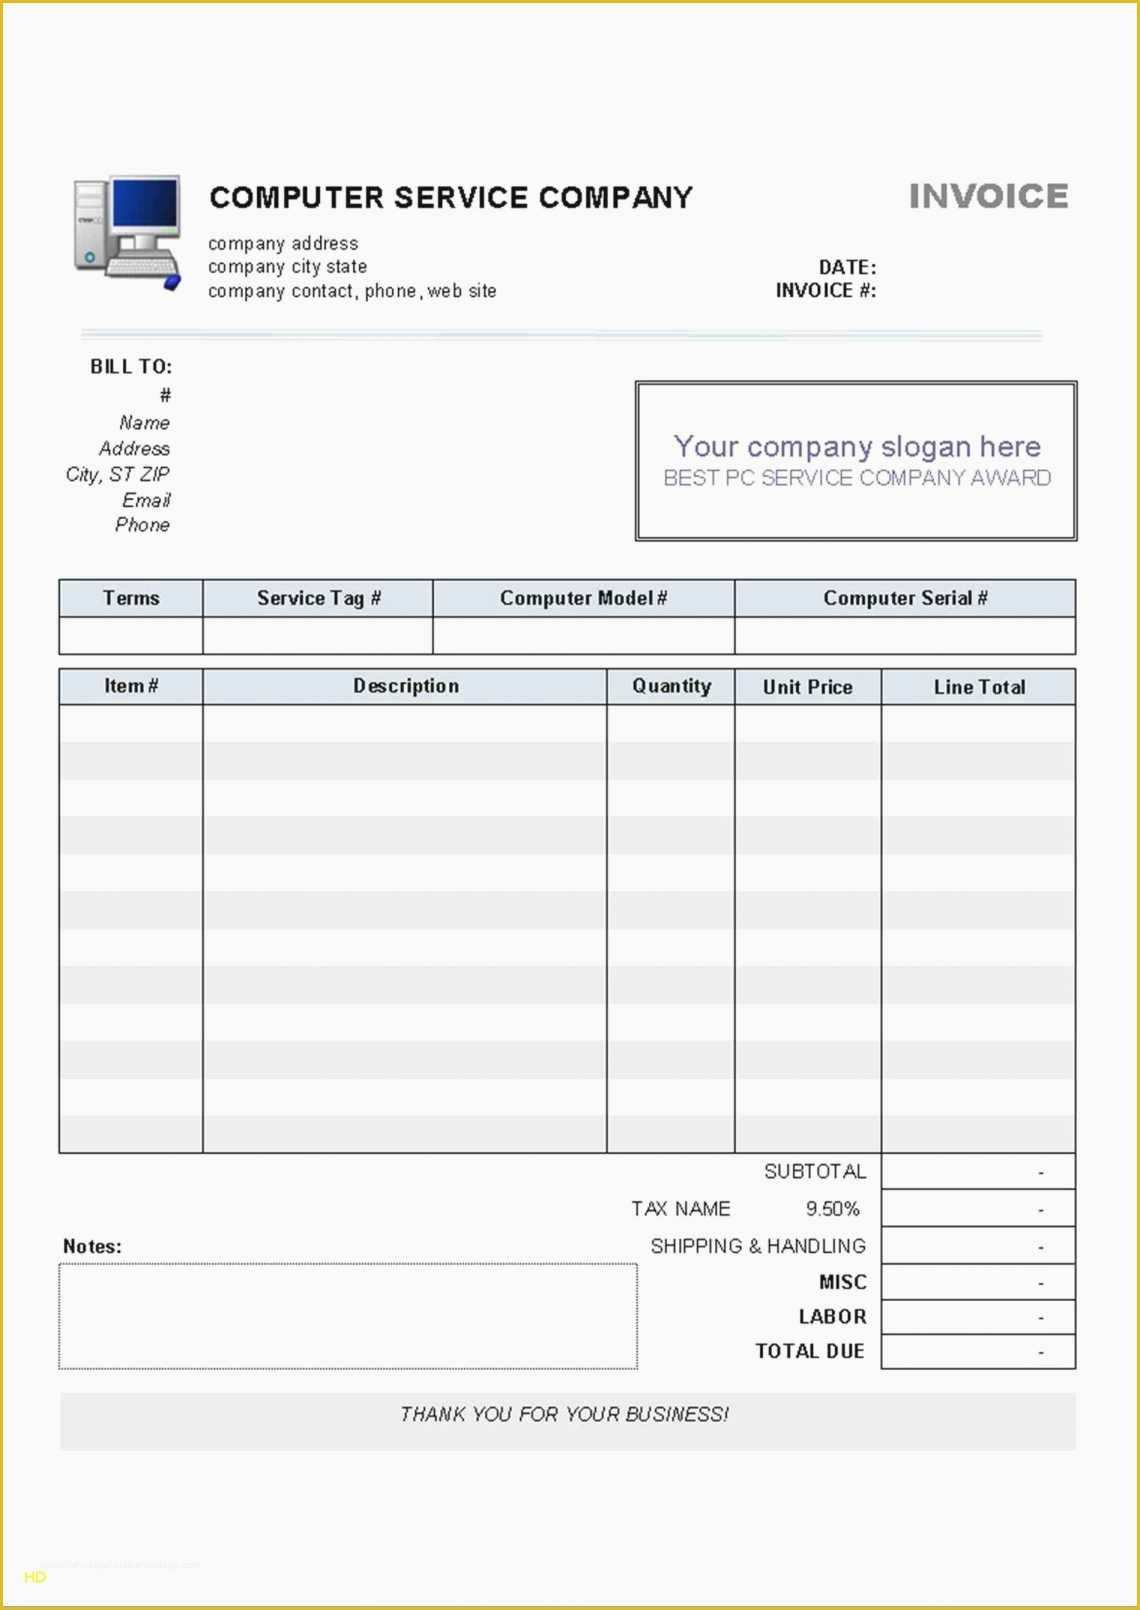 Professional Services Invoice Template Free Of Professional Services Invoice Template Free Ten Exciting